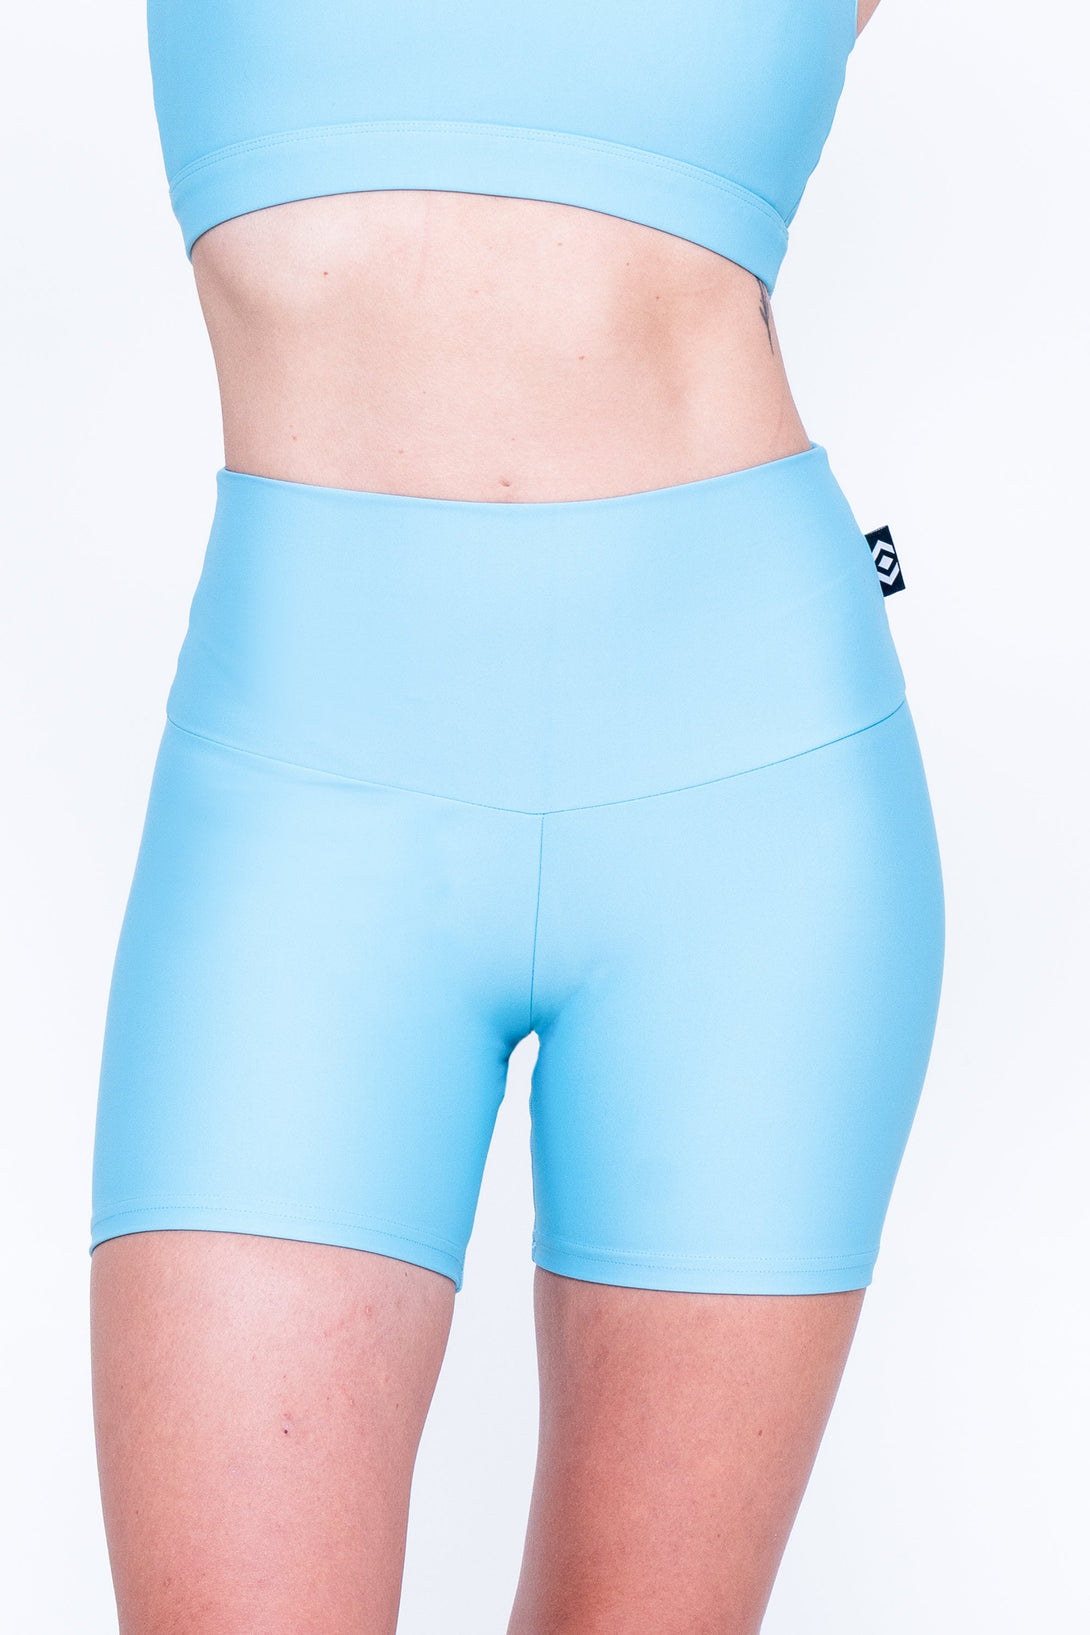 Dusty Pale Blue Performance - High Waisted Booty Shorts-Activewear-Exoticathletica